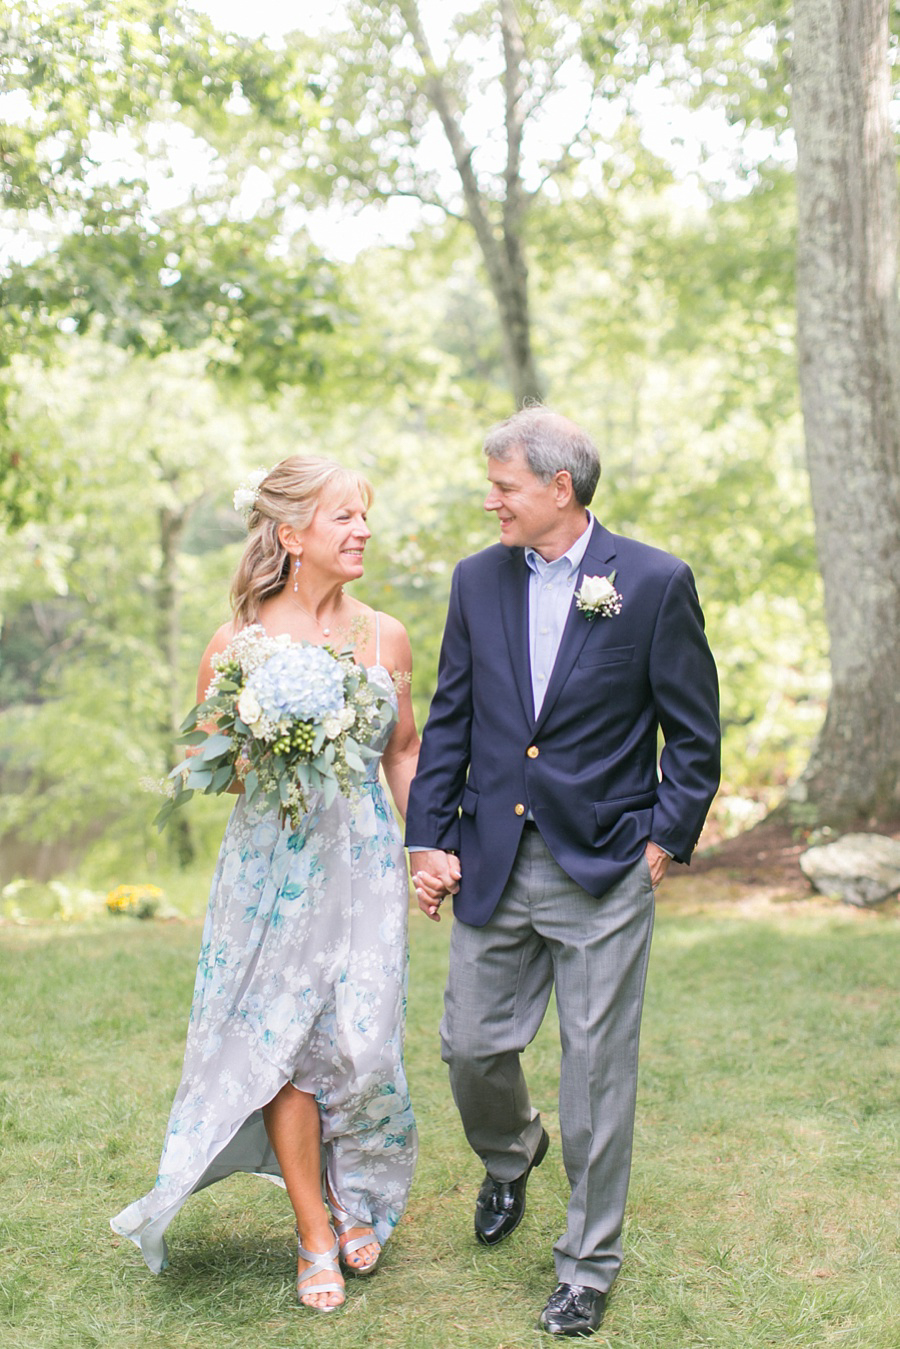 Private Estate Wedding Photographer- Amy Rizzuto Photography-24